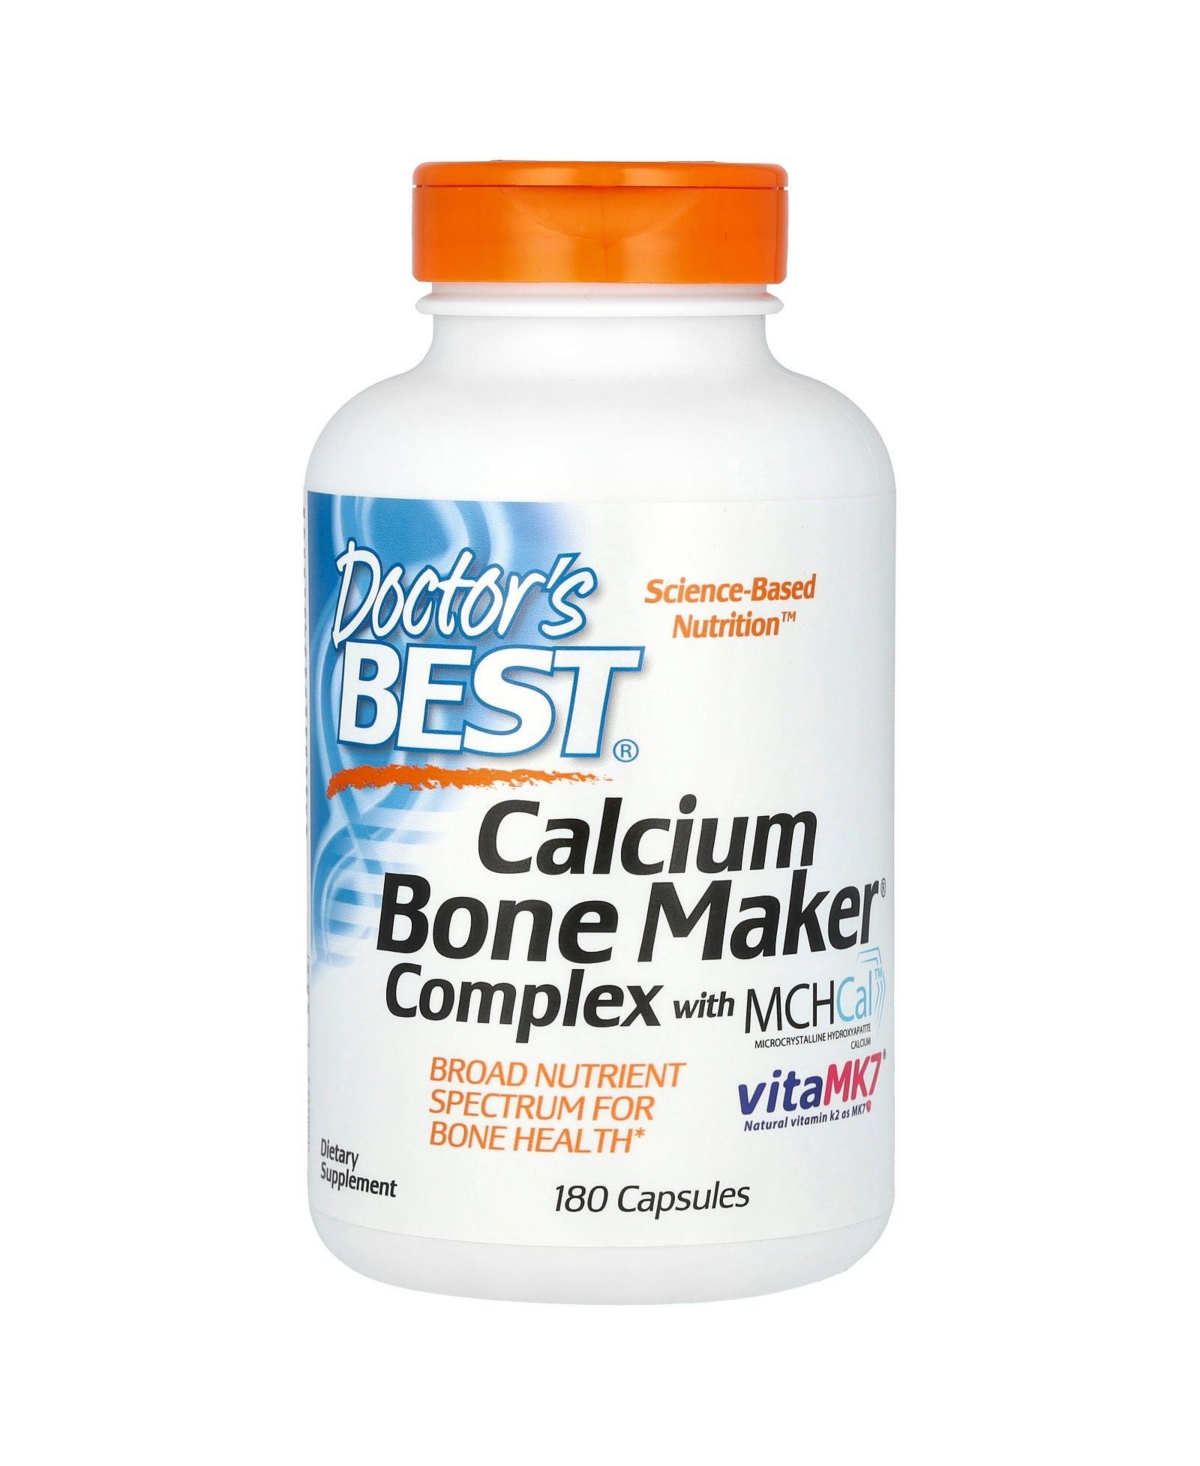 Calcium Bone Maker Complex with MCHCal - 180 Capsules - Assorted Pre-Pack